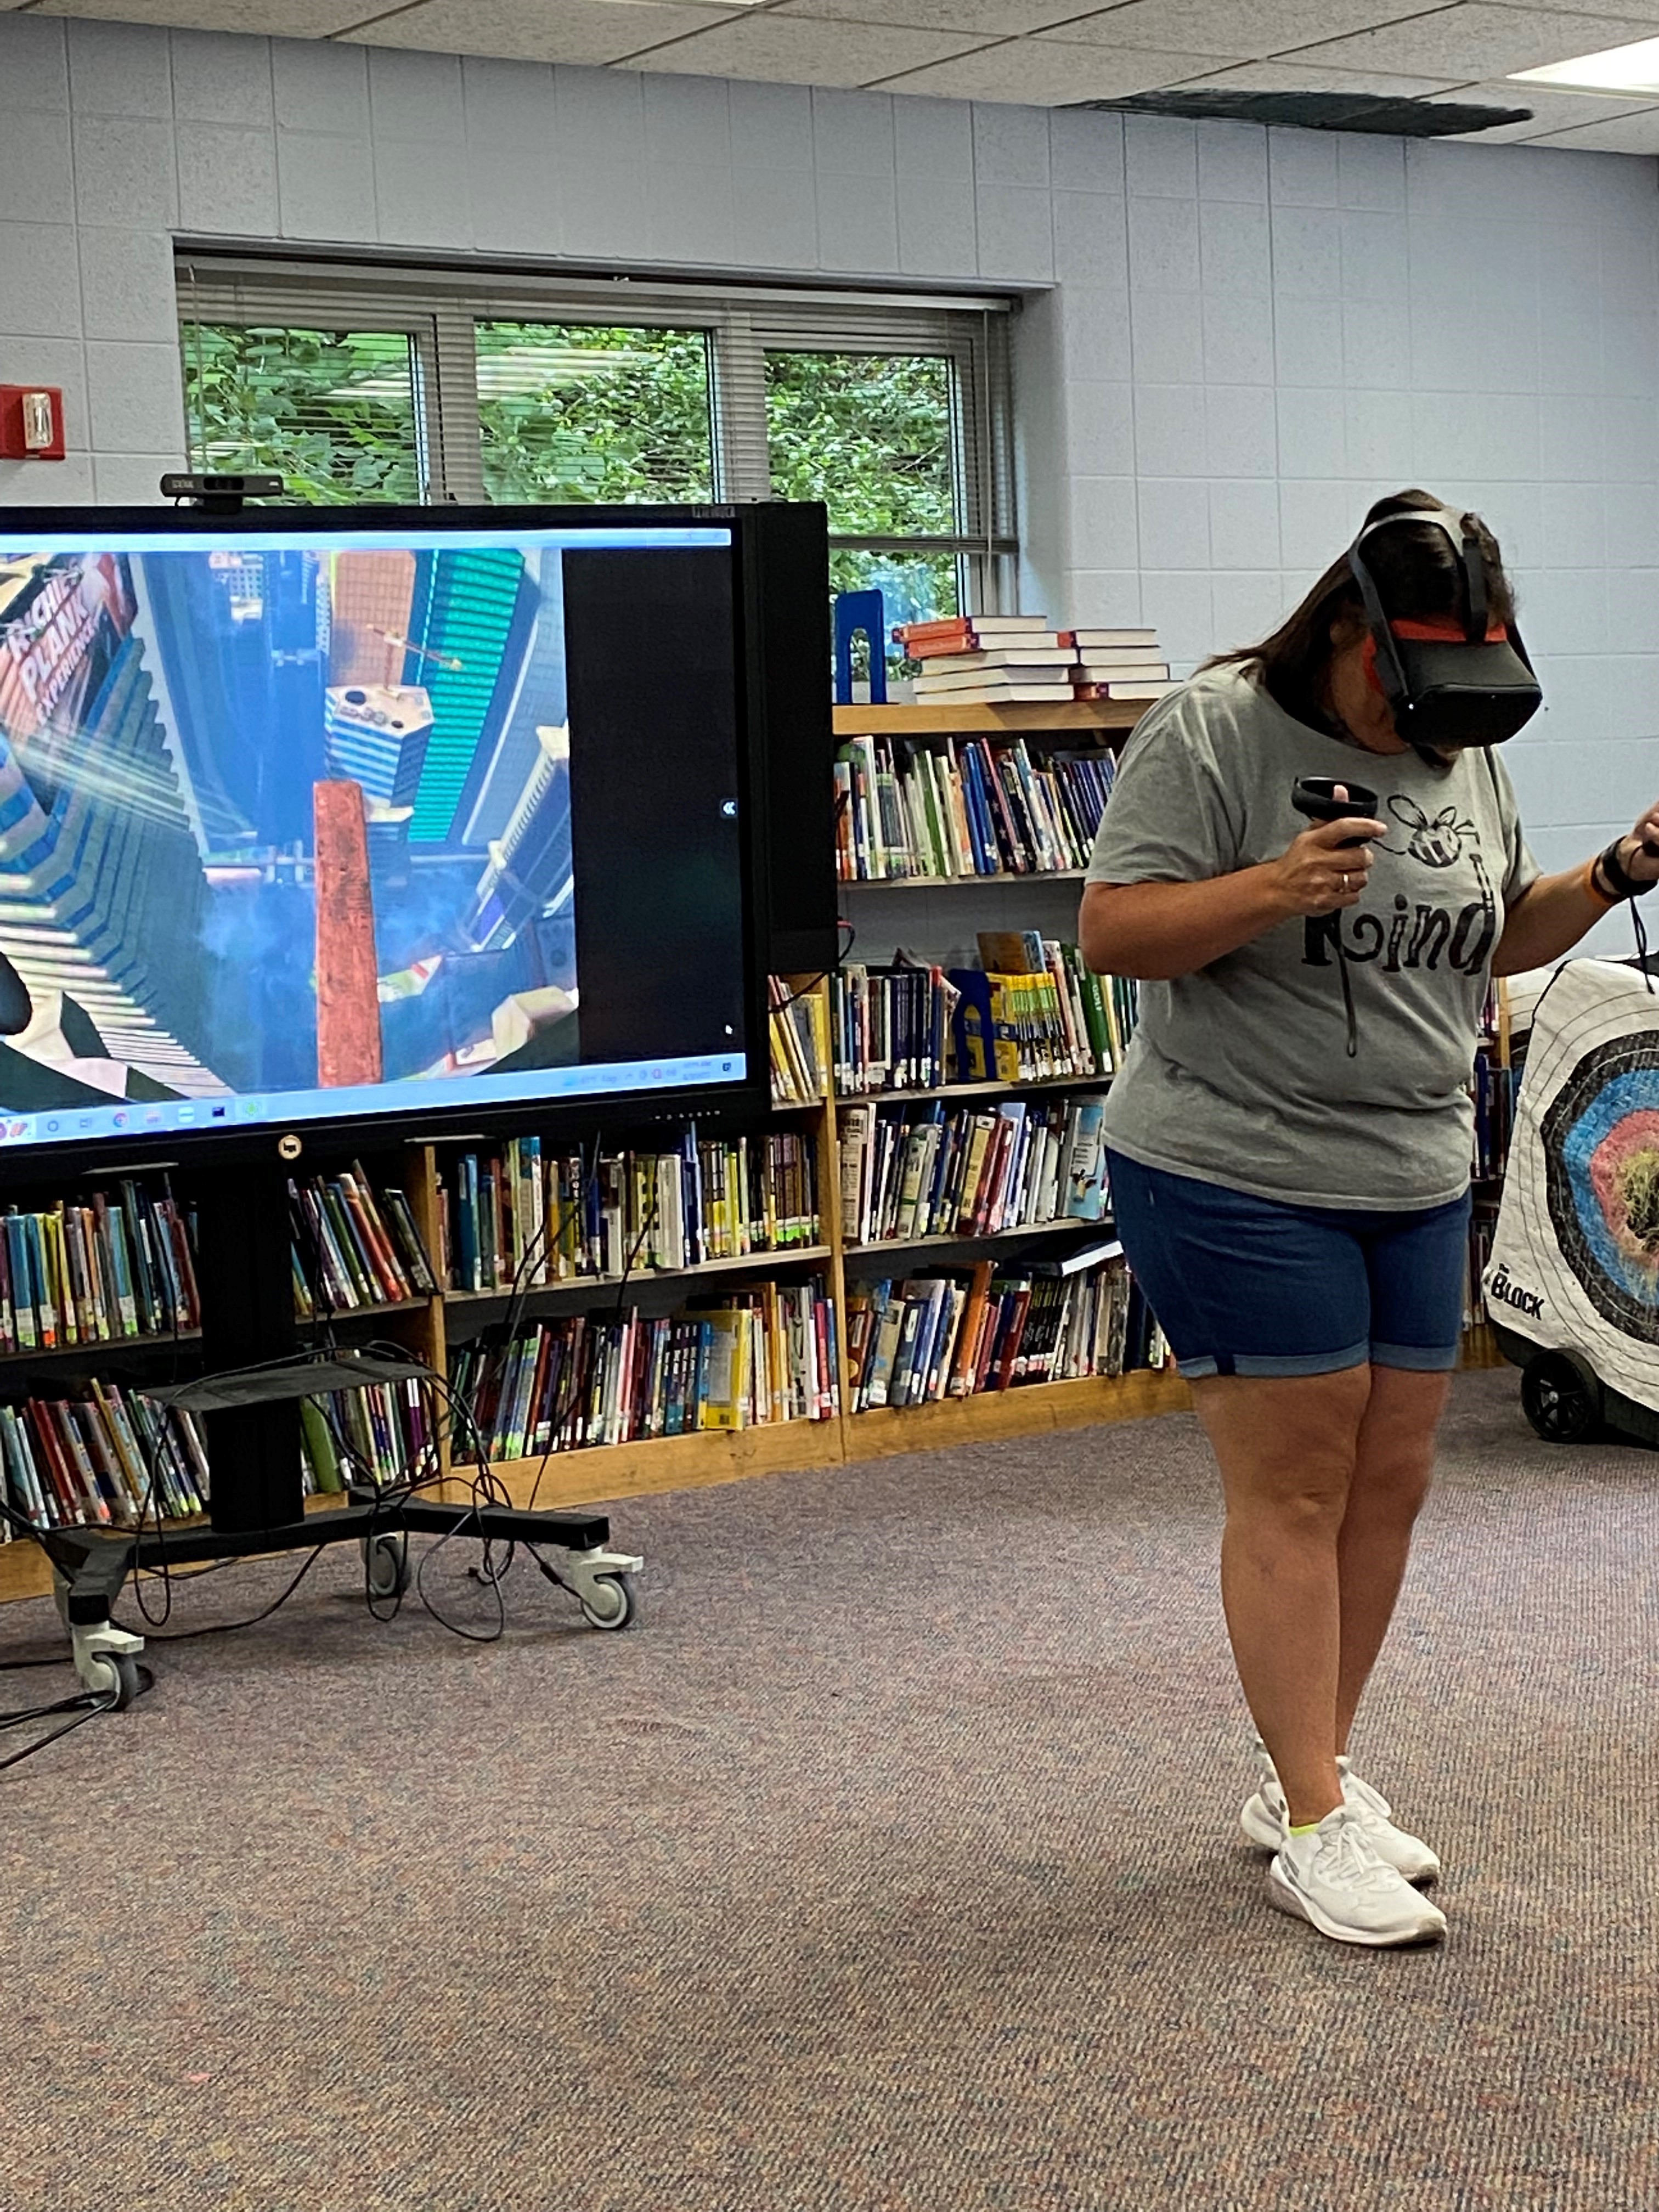 Students and staff experiencing virtual reality